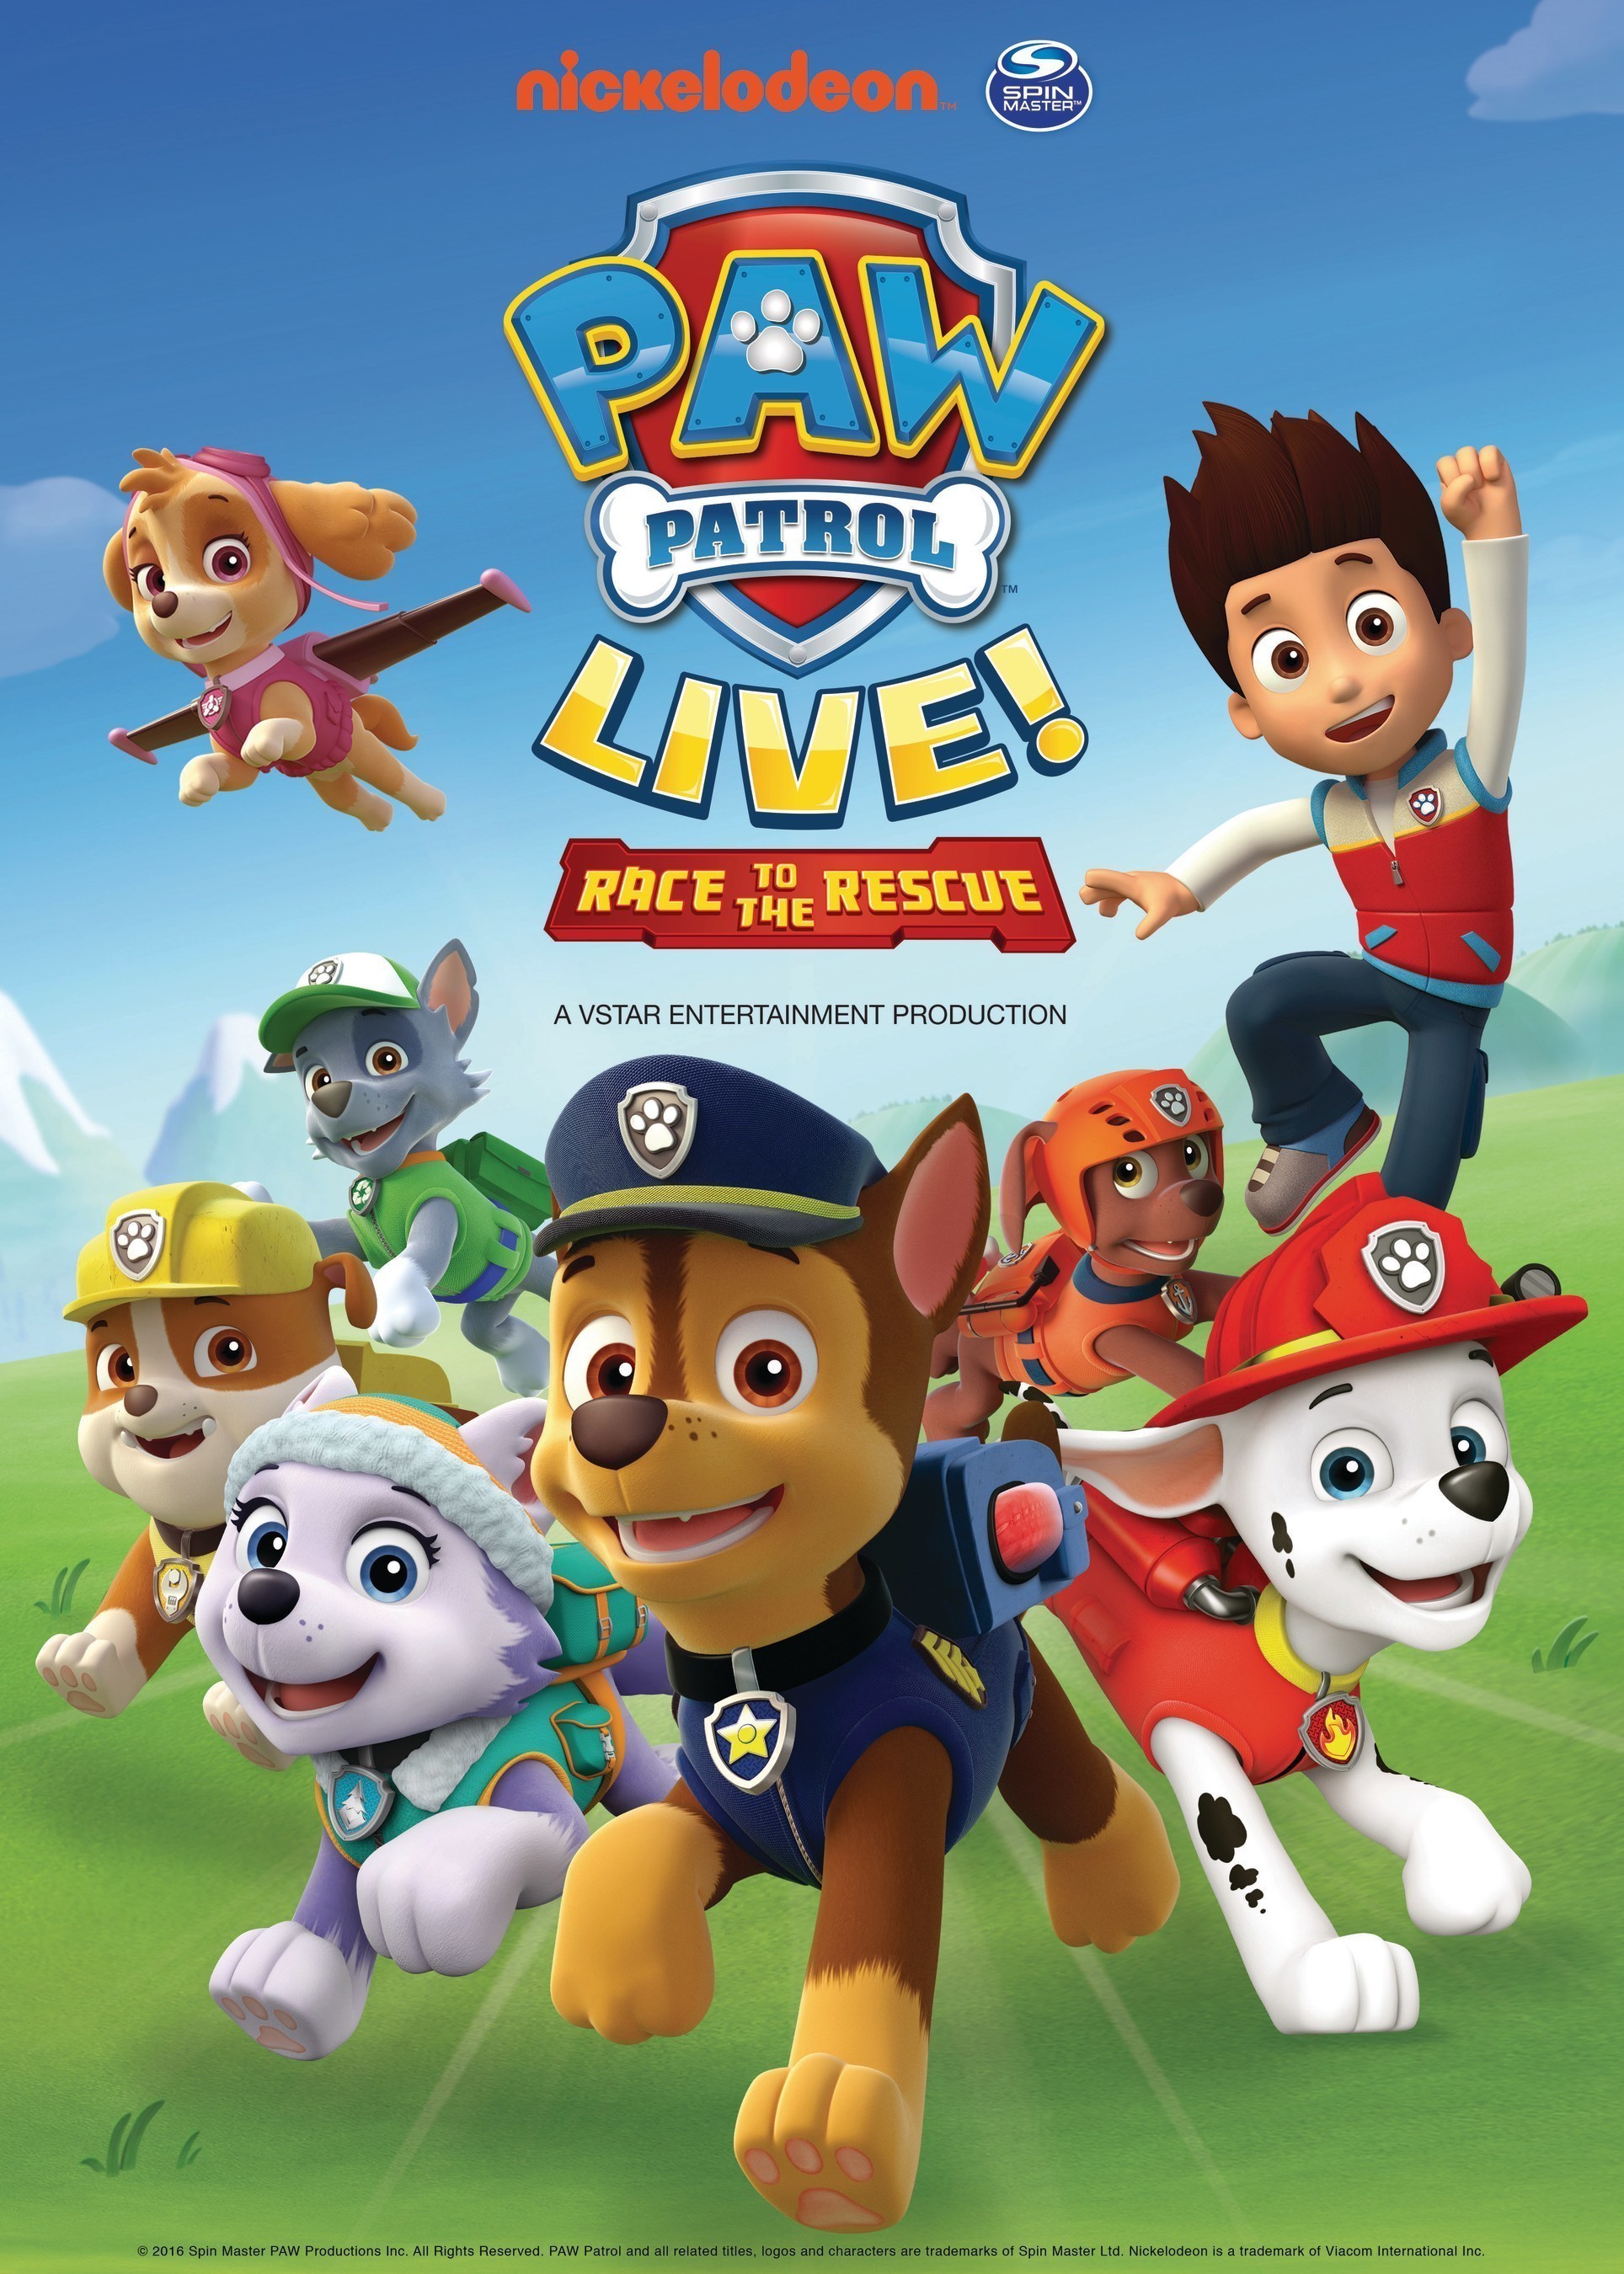 PAW Patrol the Rescue" Announces First Stops